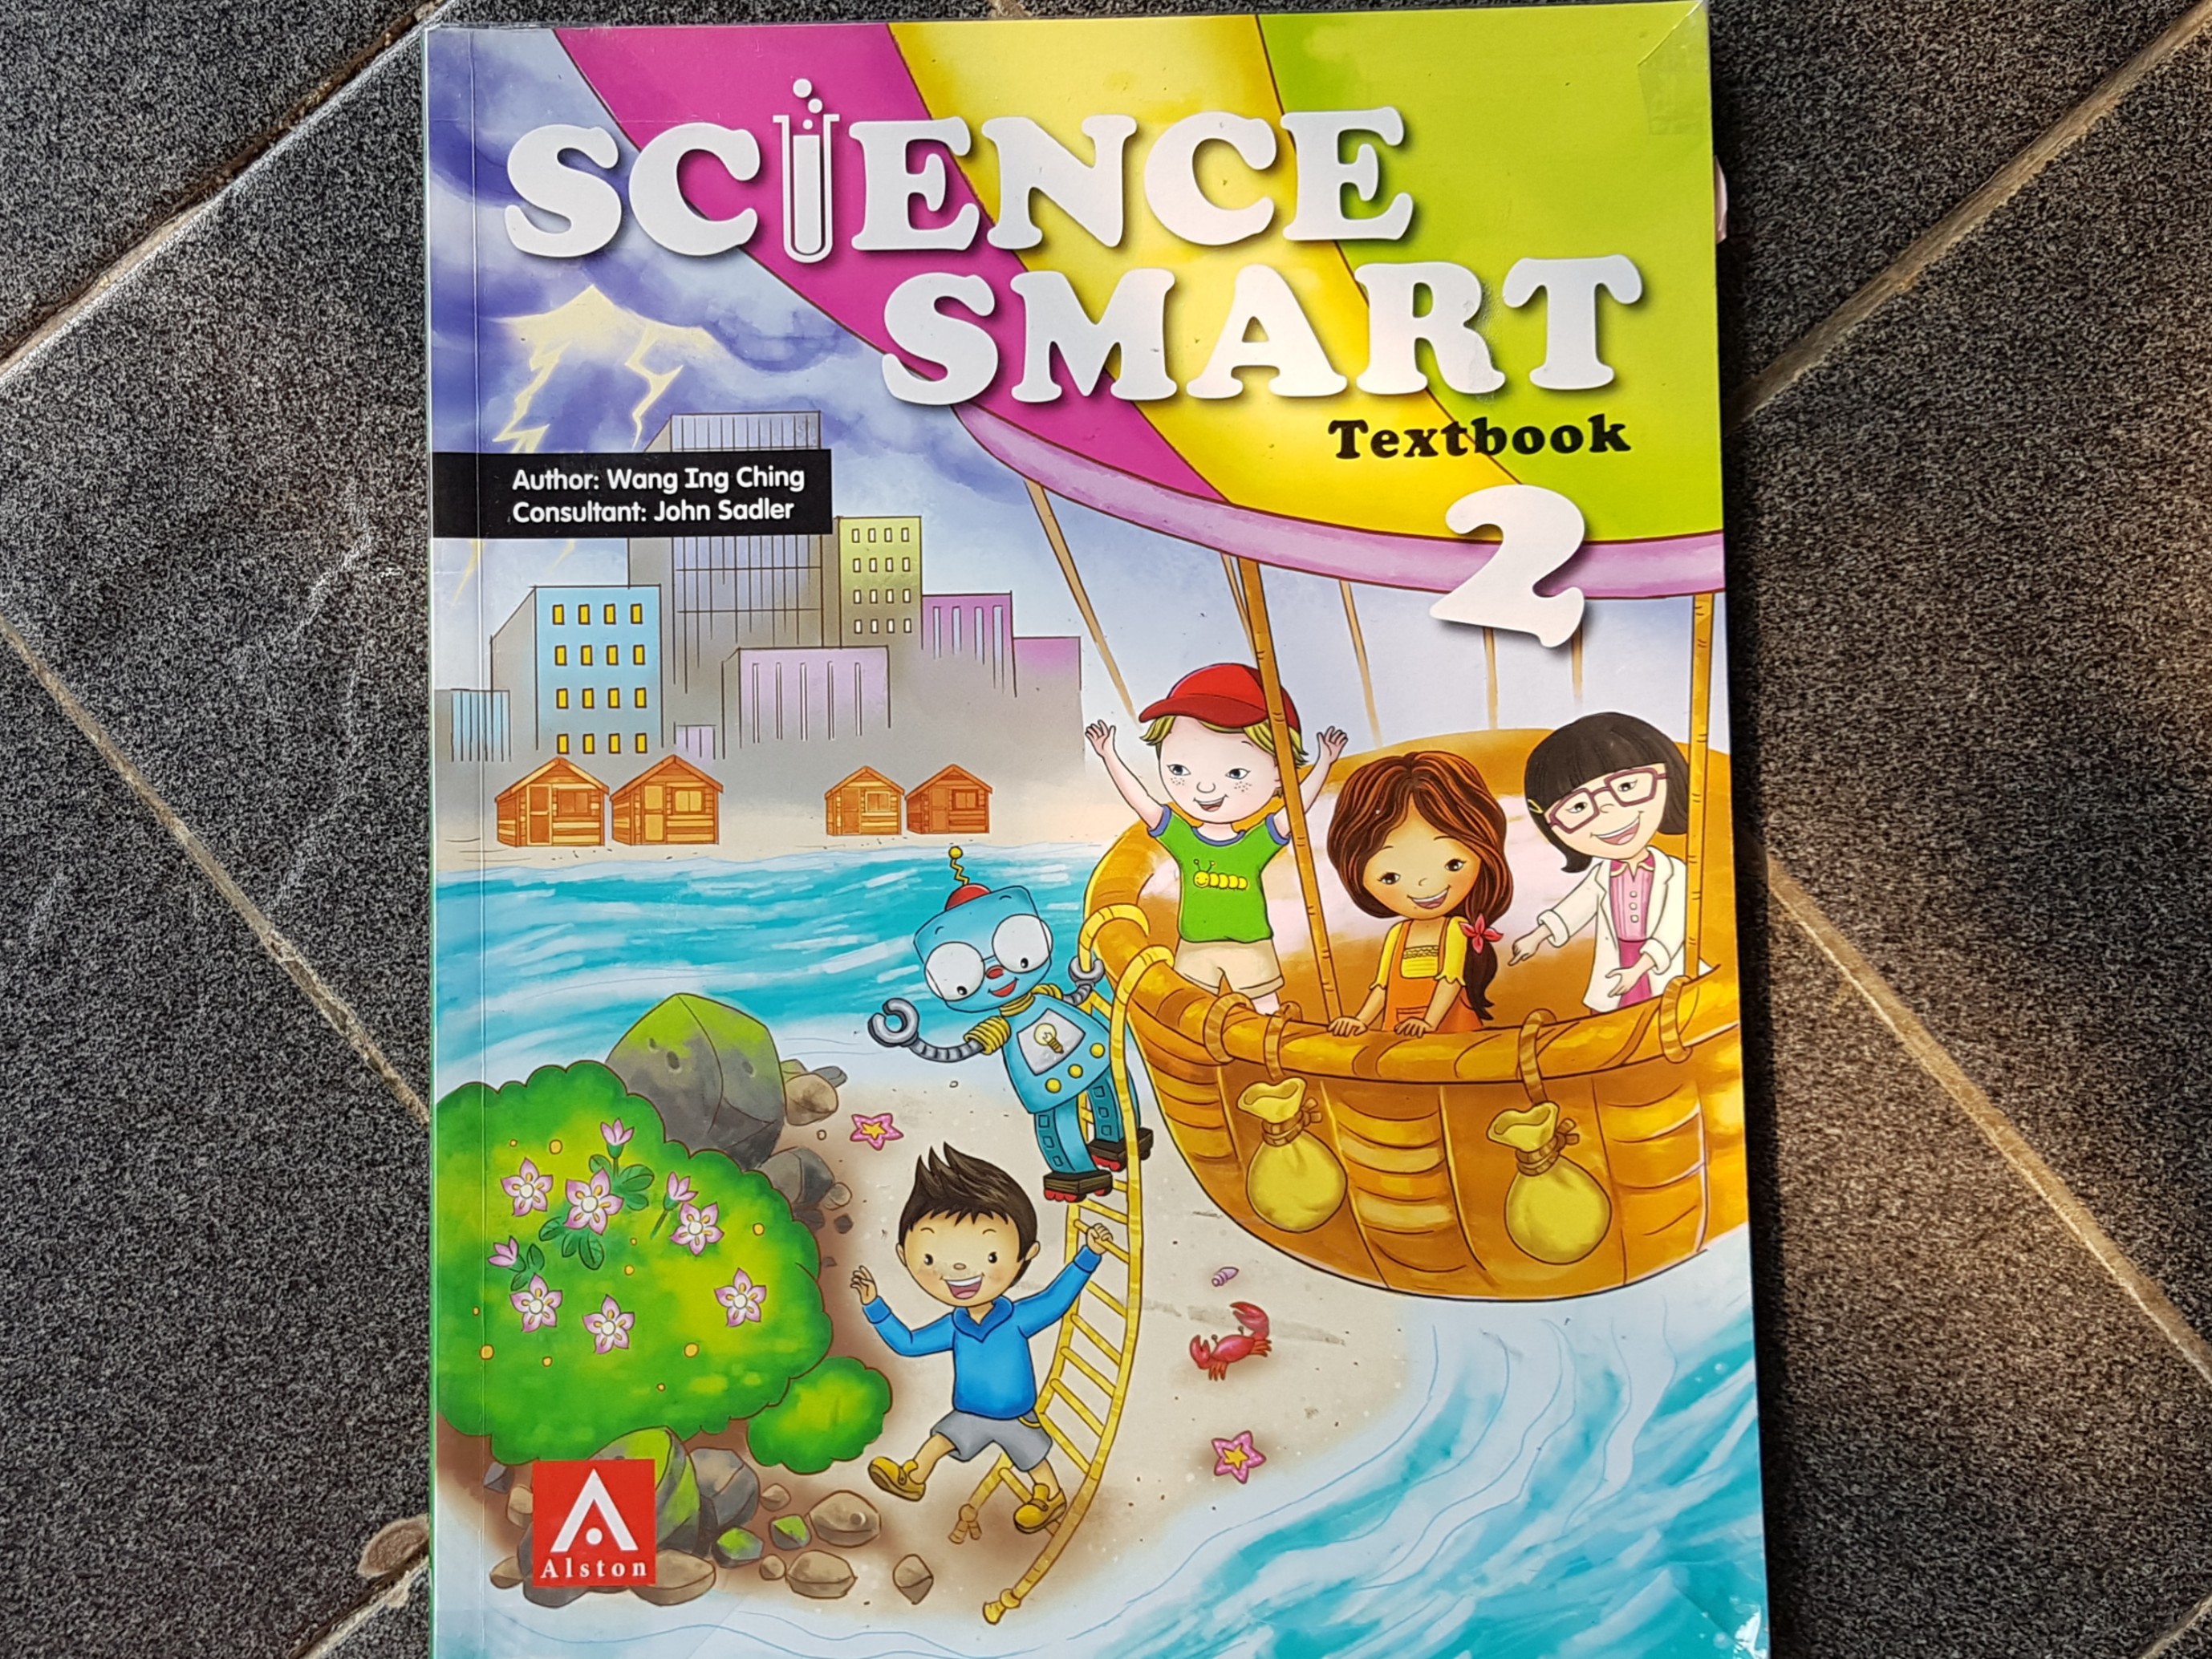 Science Smart 1 2 3 textbook Books & Stationery Textbooks on Carousell